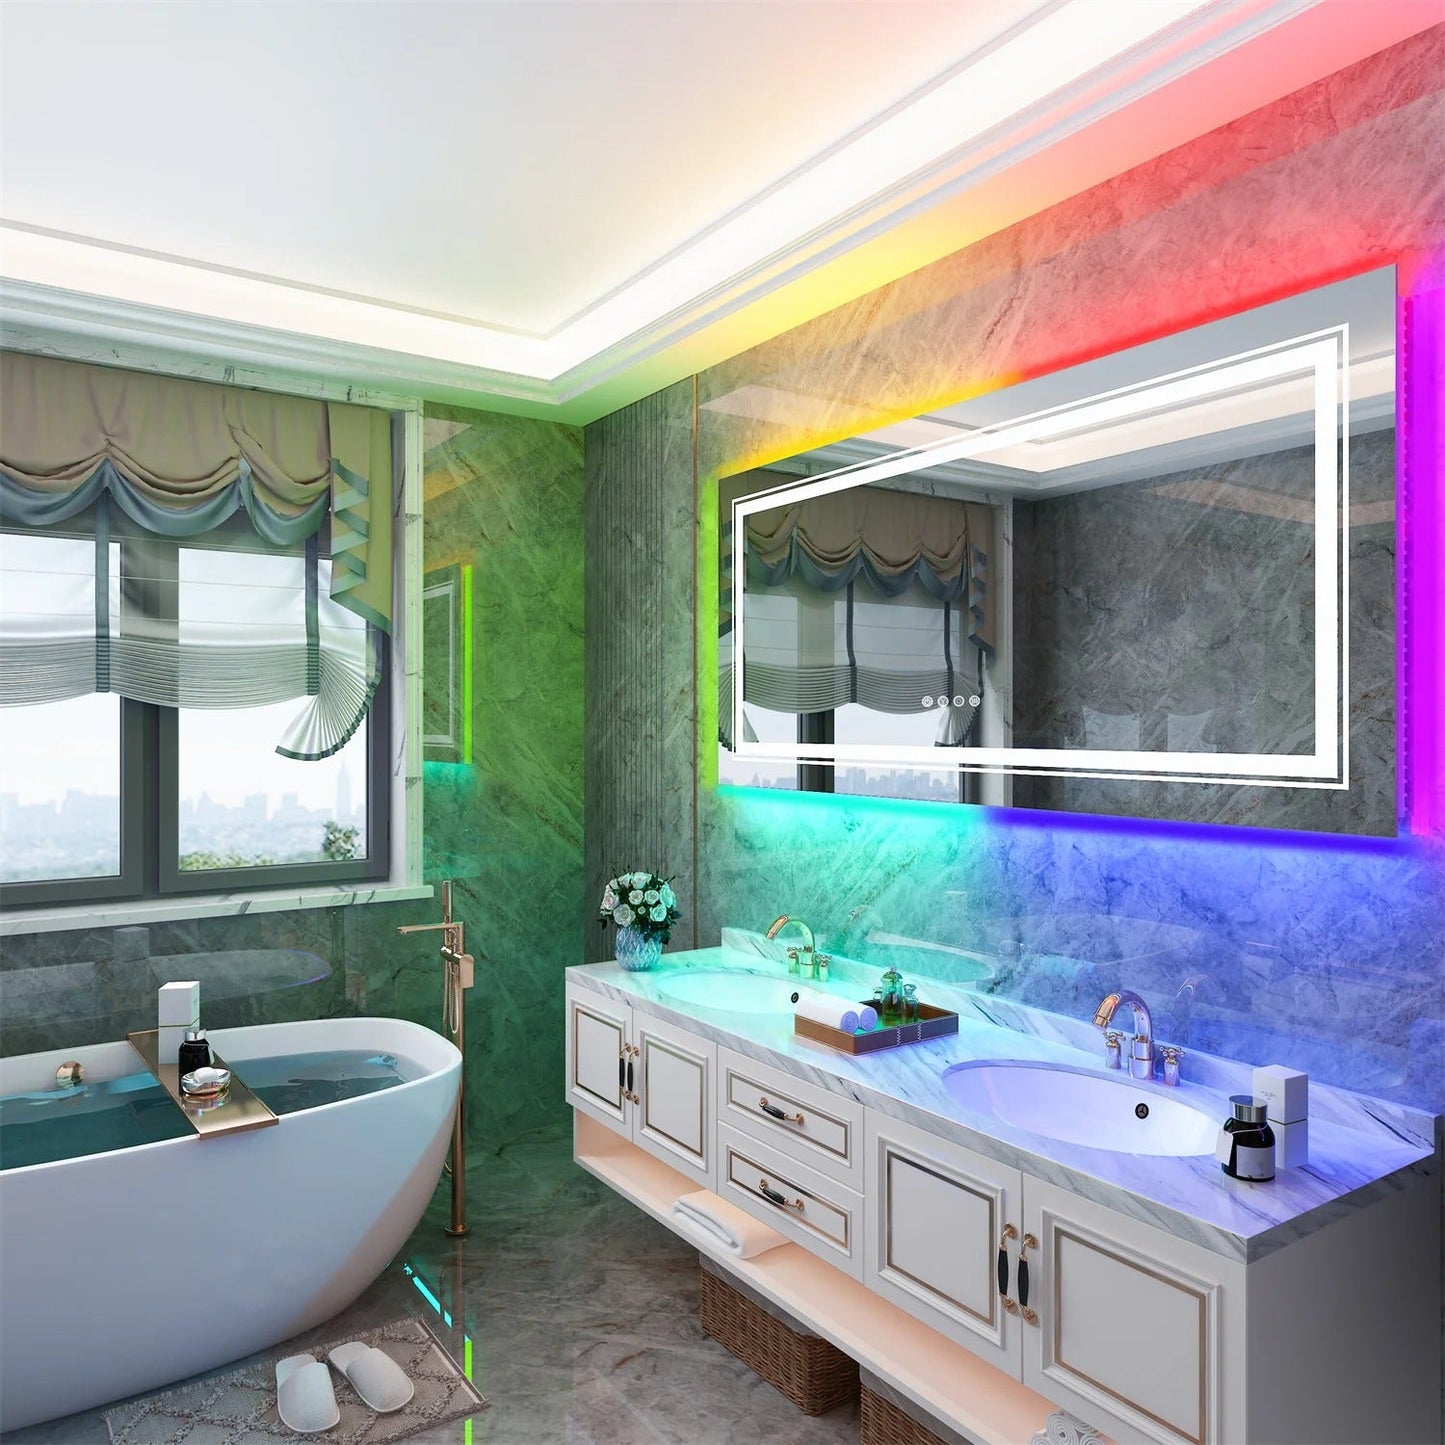 Large Rectangle Glitzy RGB Double Light LED Bathroom Mirror RGB Color Changing Backlight, Dimmable, Anti-Fog, and Shatterproof